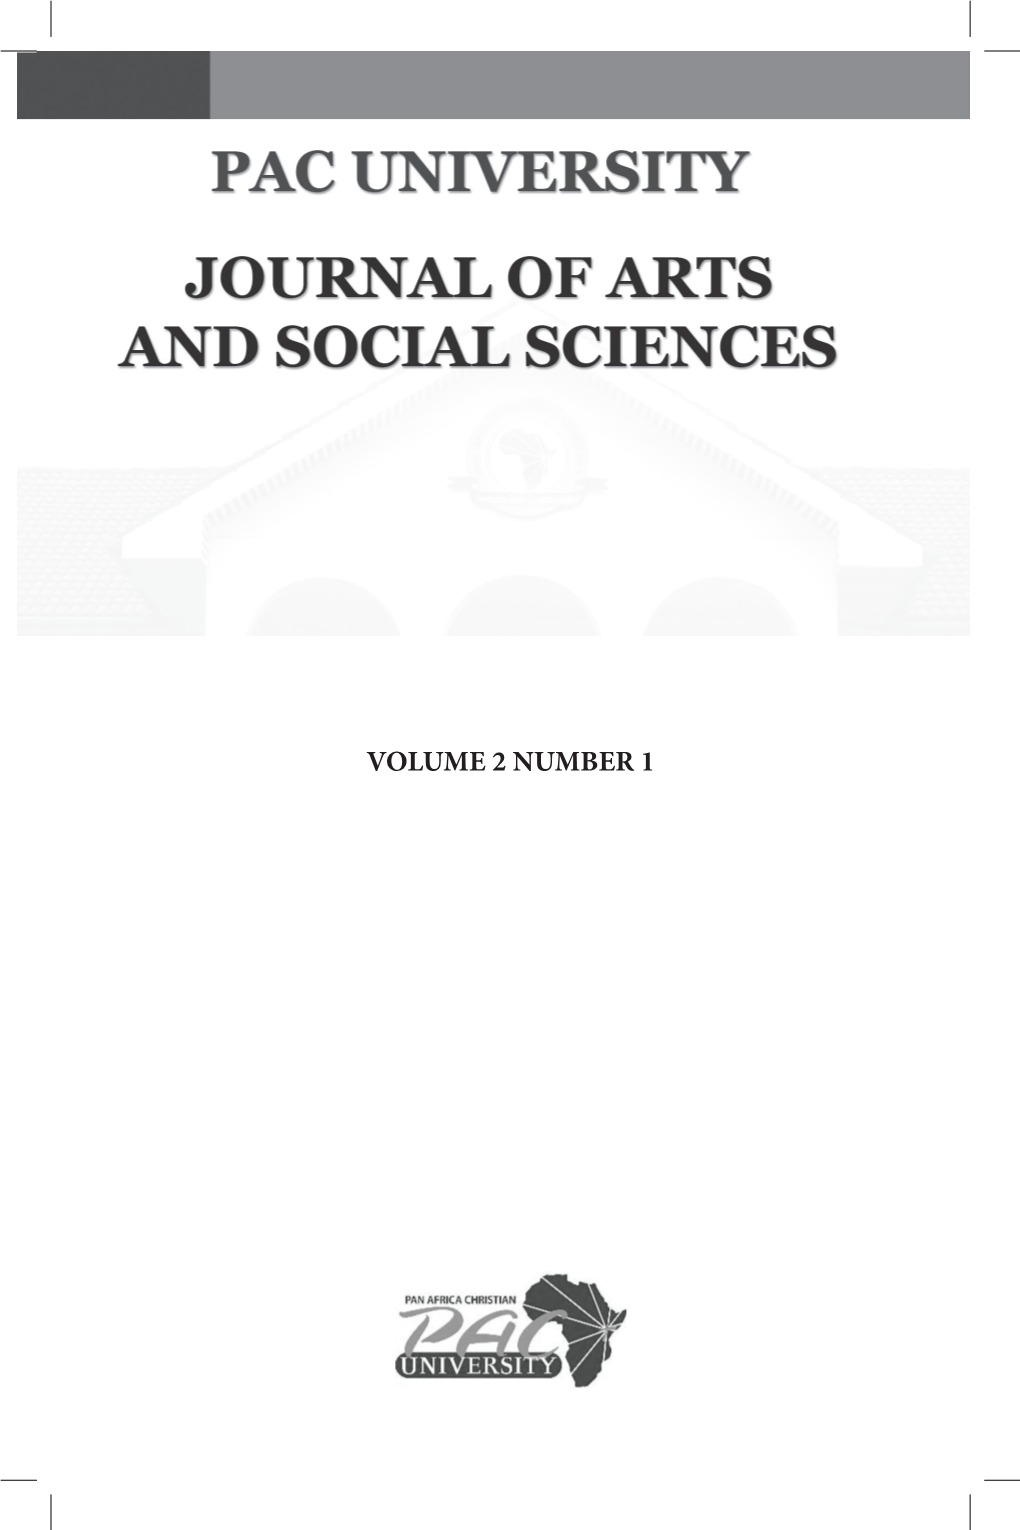 Volume 2 Number 1 Pac University Journal of Arts and Social Sciences